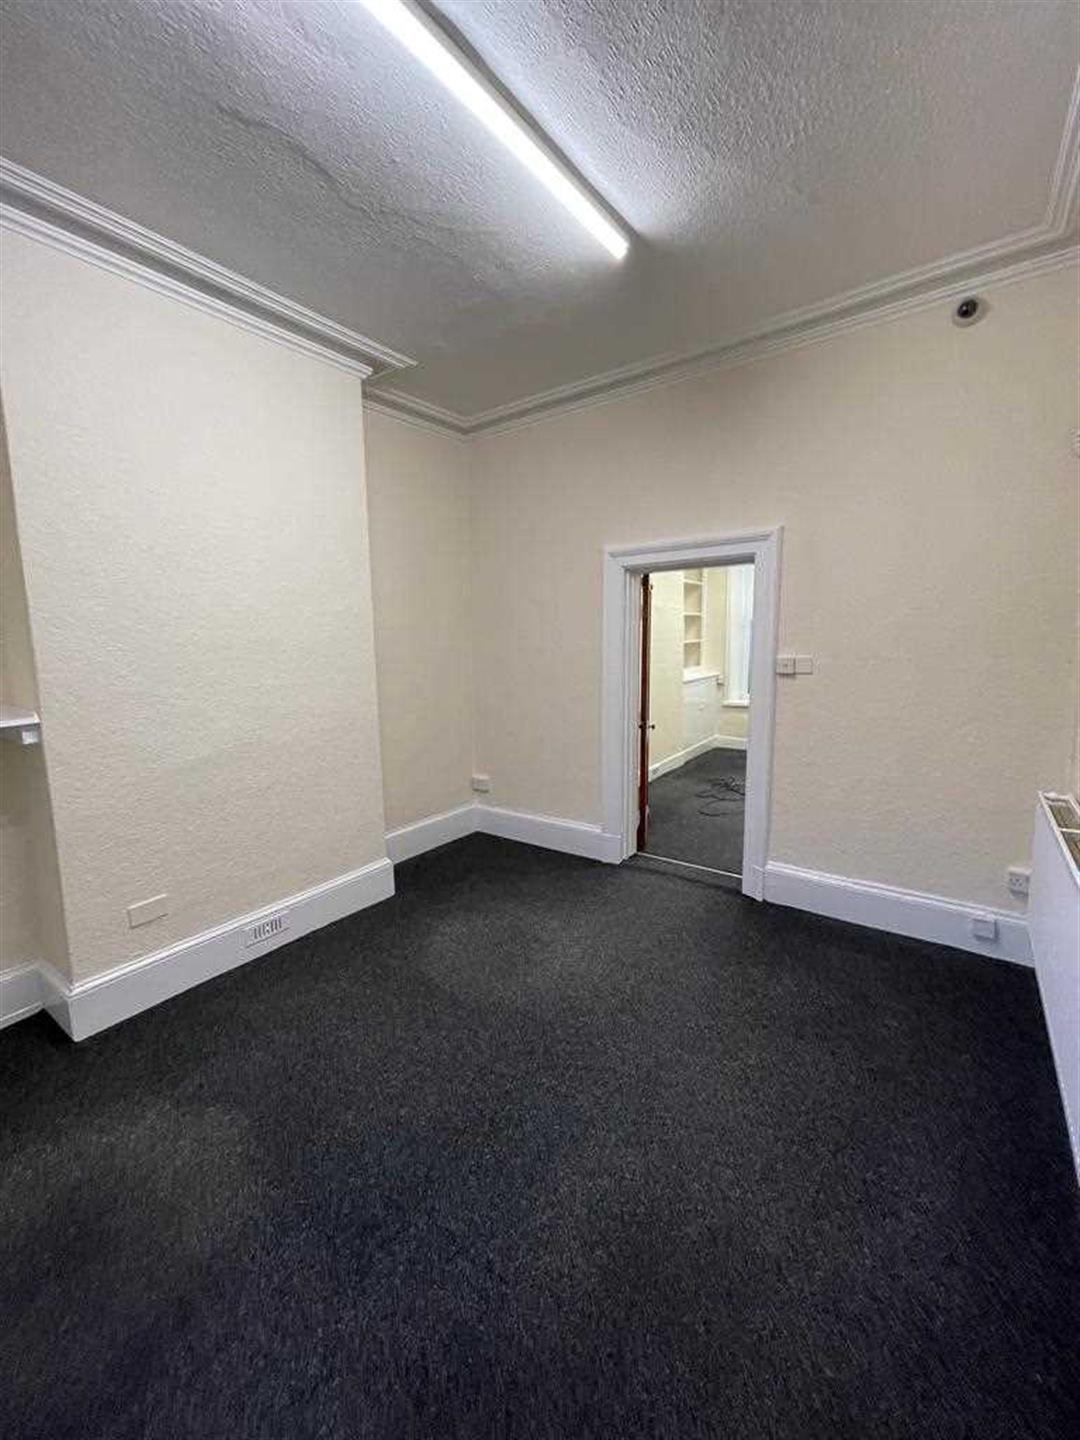 Commercial Property To Rent - Image 4